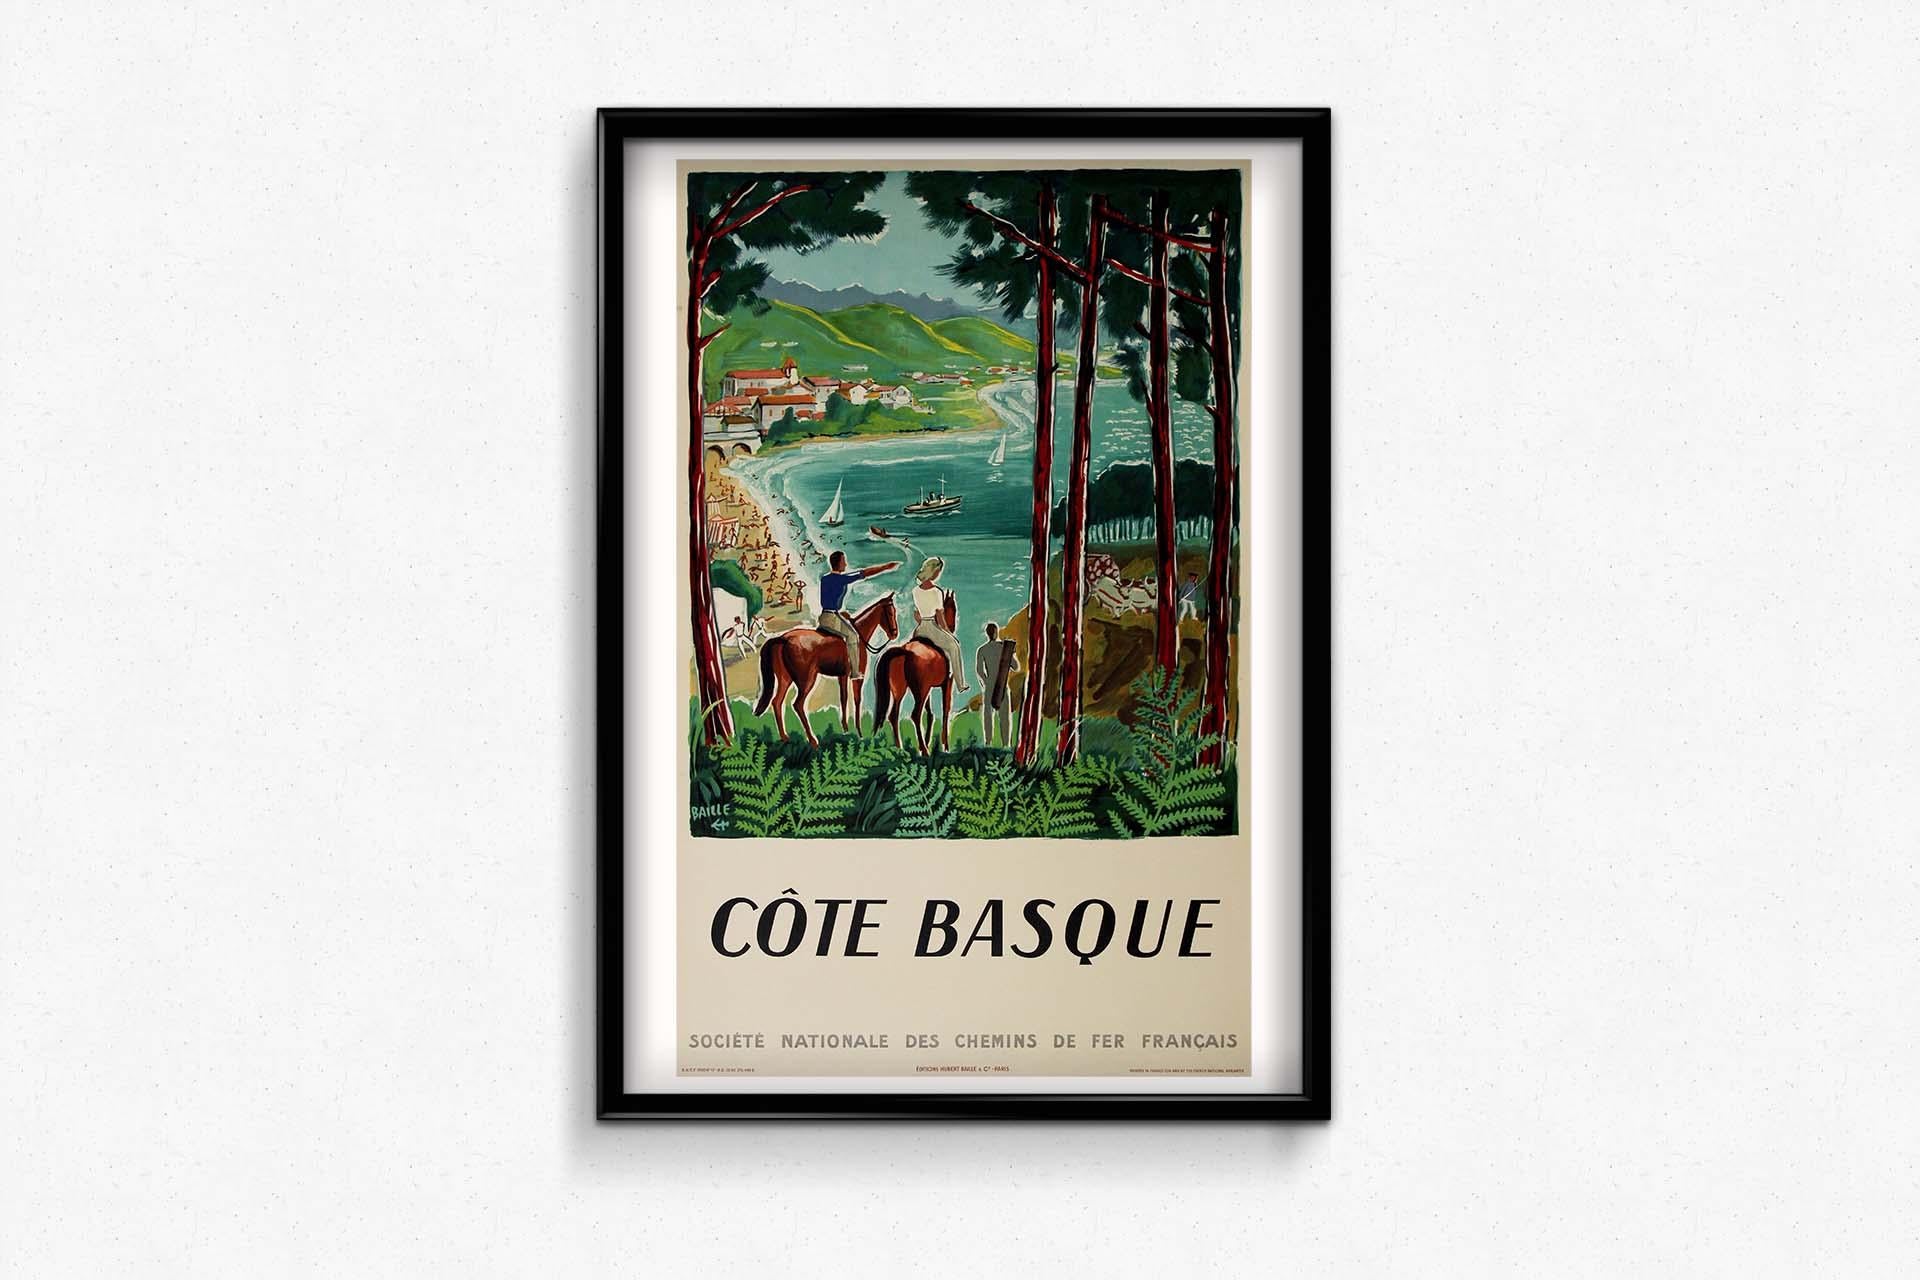 Hervé Baille, a distinguished artist celebrated for his captivating travel posters, crafted a masterpiece in 1950 with his original creation for SNCF Côte basque. Born on January 21, 1896, in Sète, Baille's artistic journey reflected a blend of